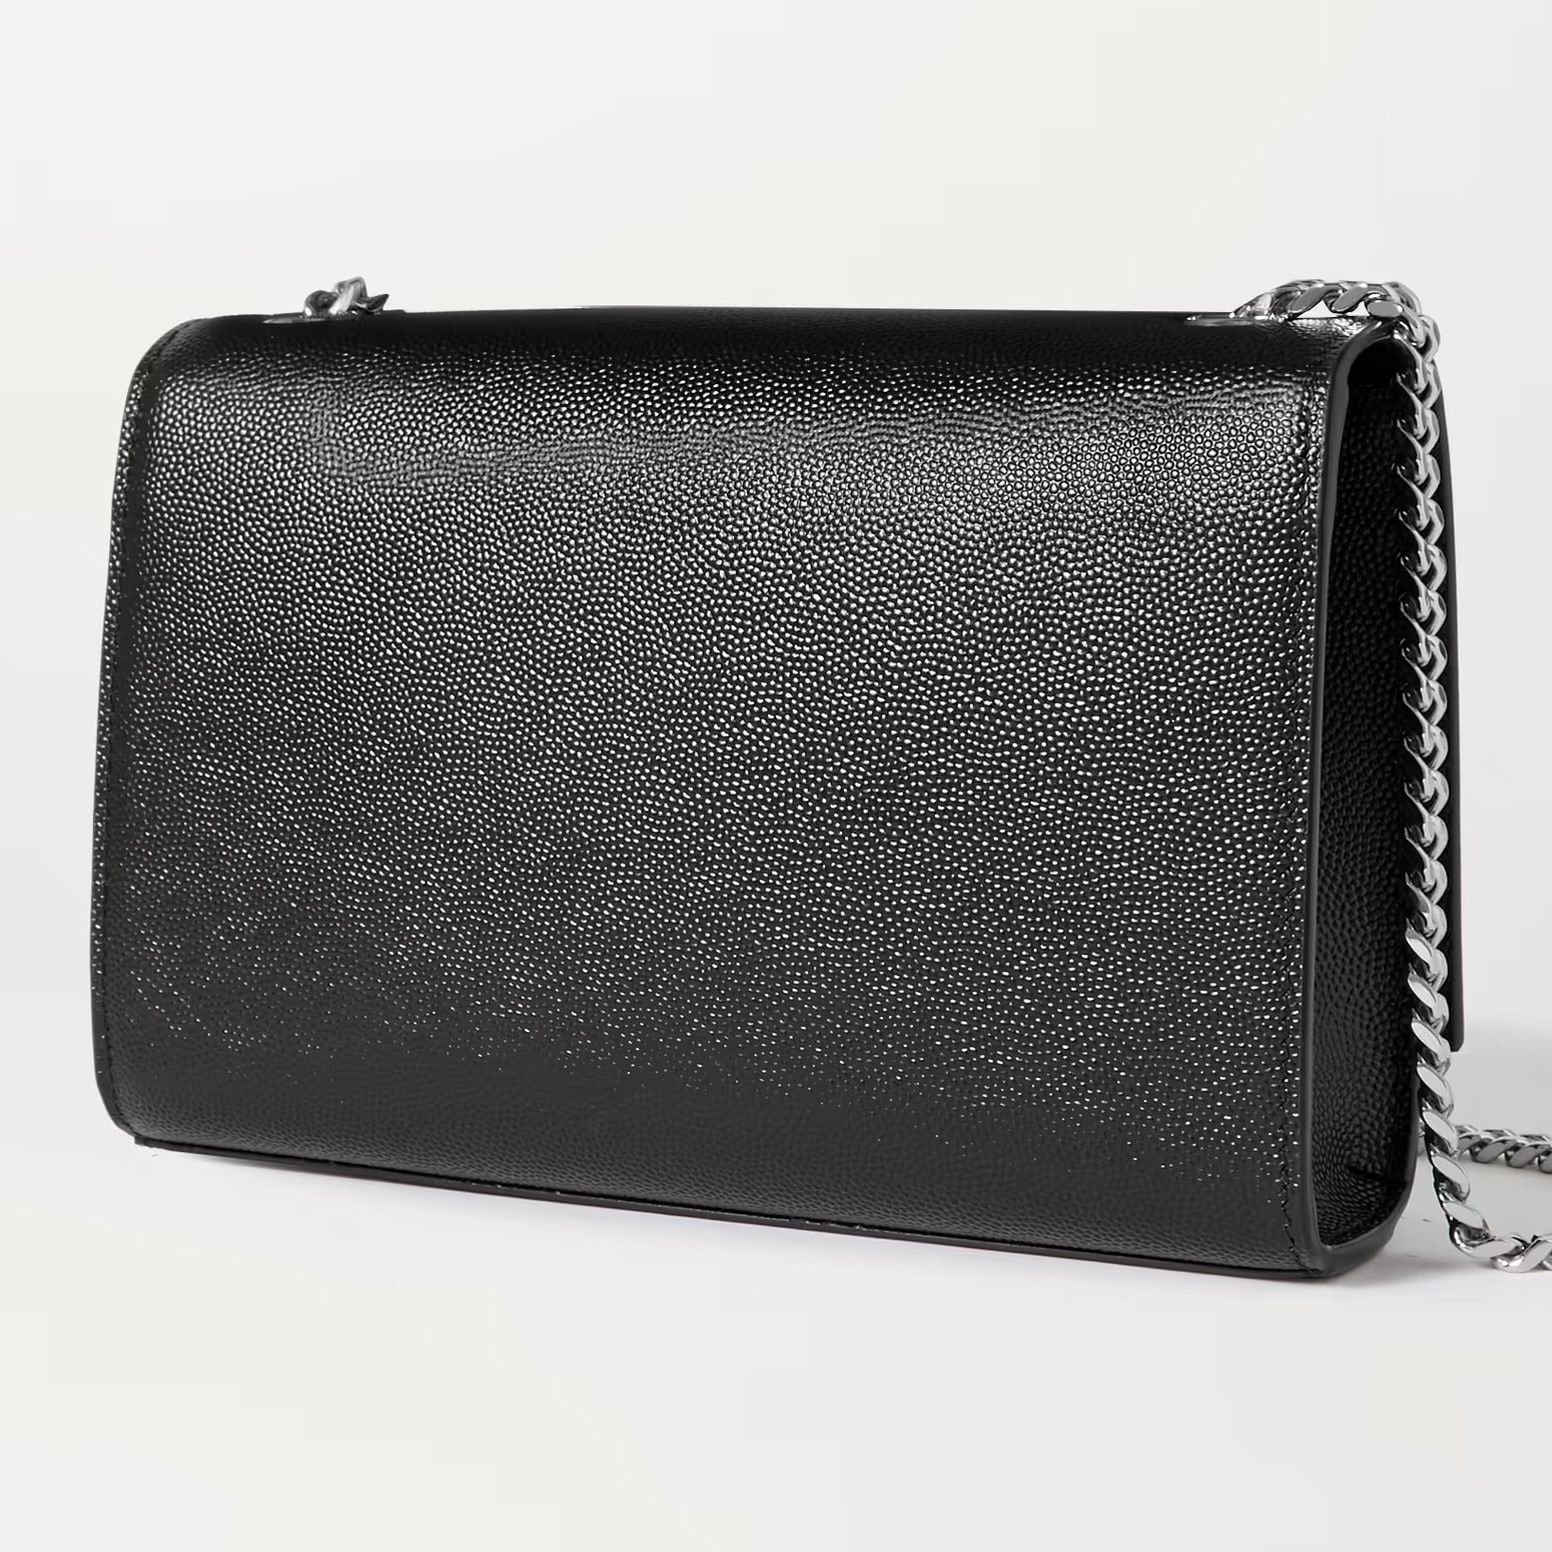 TÚI ĐEO CHÉO NỮ YSL SAINT LAURENT KATE SMALL TEXTURED LEATHER SHOULDER BAG IN BLACK 6